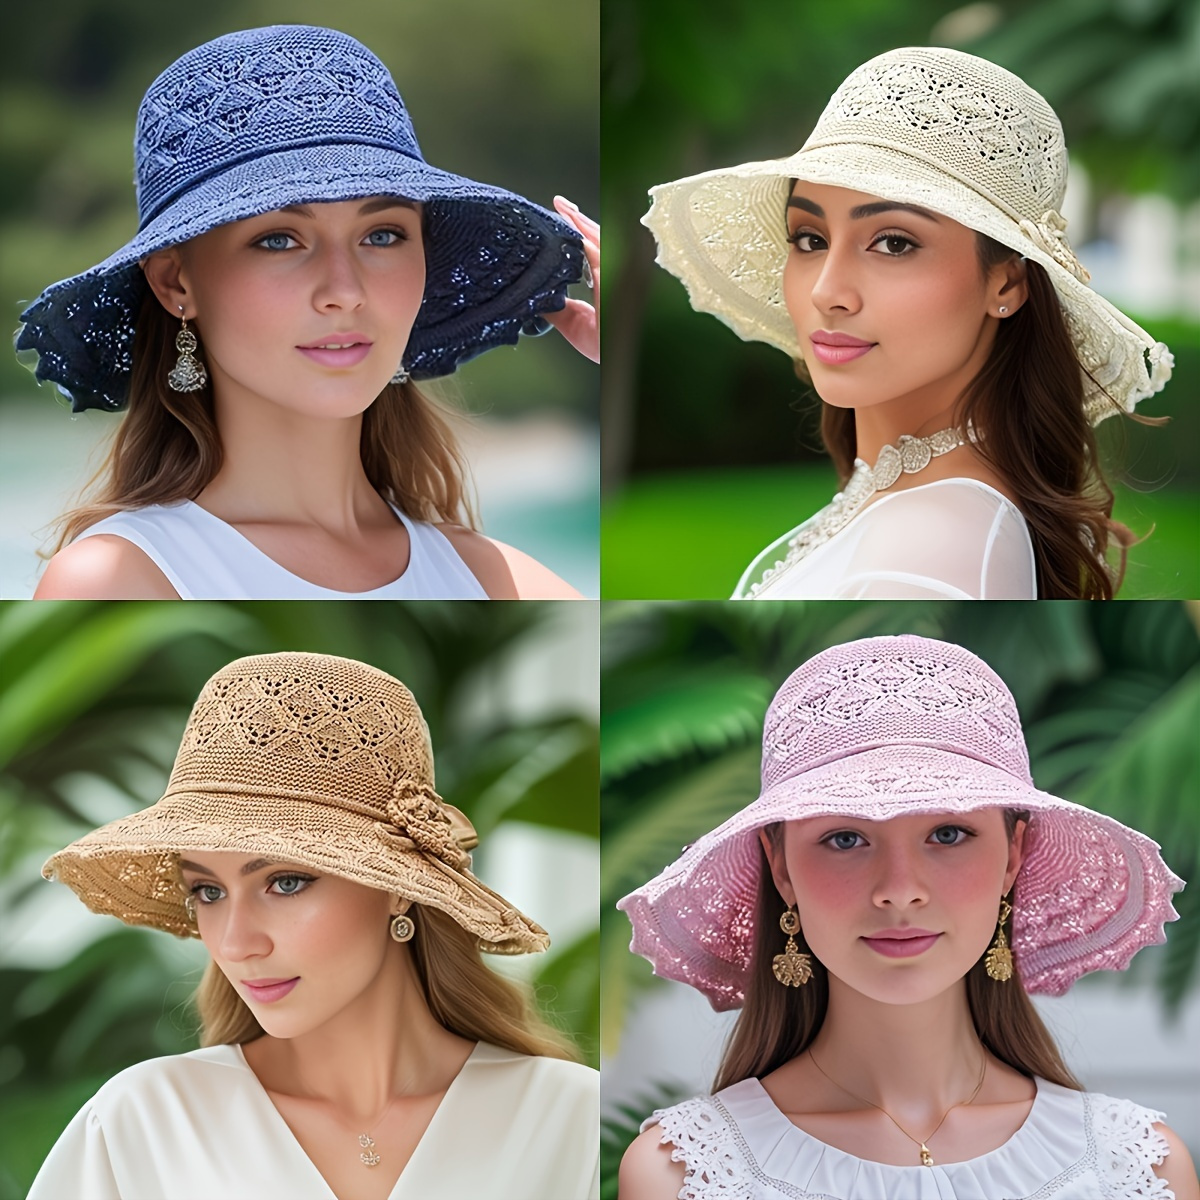 

2pcs Women Knit Sunhat With Brim Beach Outdoor Bucket Hat Fisherman Hat, Beach Hat Washable Hollow Braided Summer Sun Hat Bowknot Rope Decor